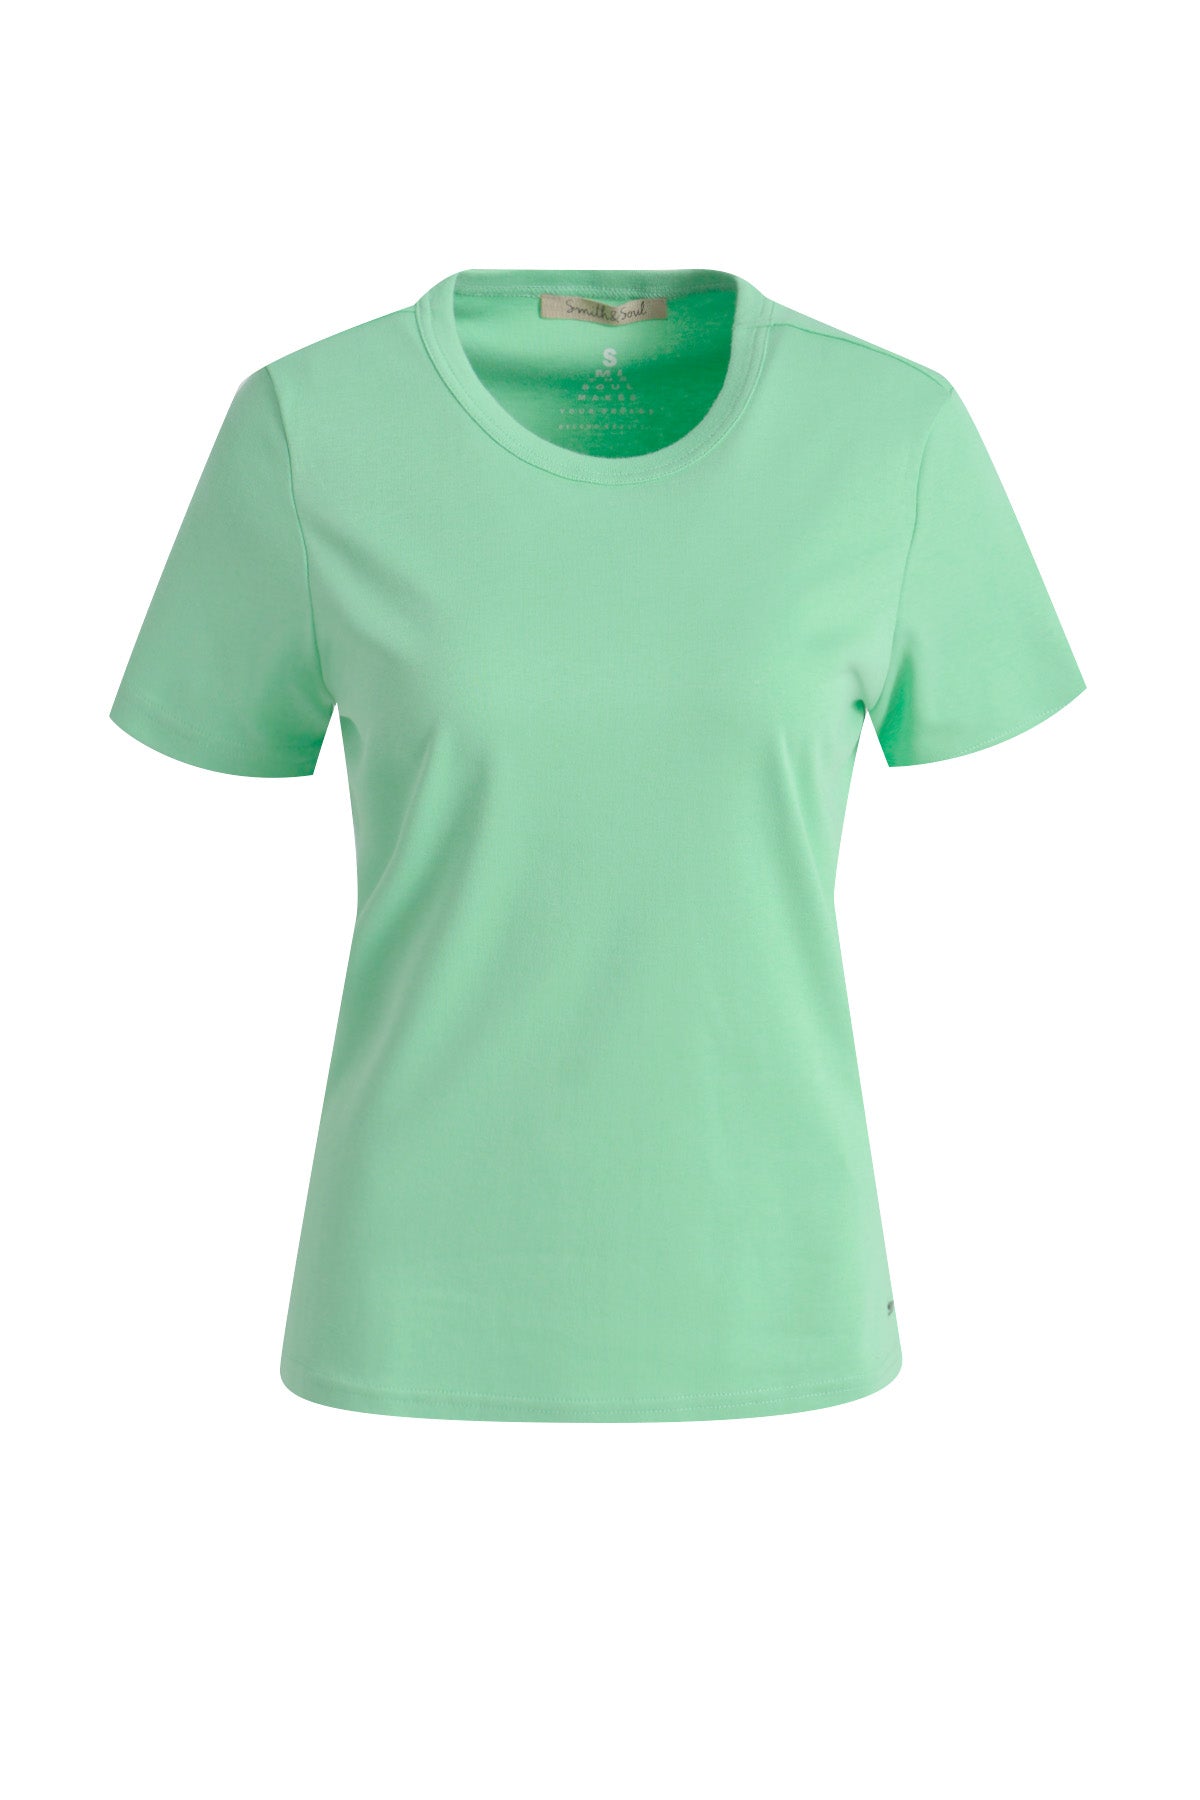 Smith & Soul Green T-shirt - for sale Woodcock & Cavendish